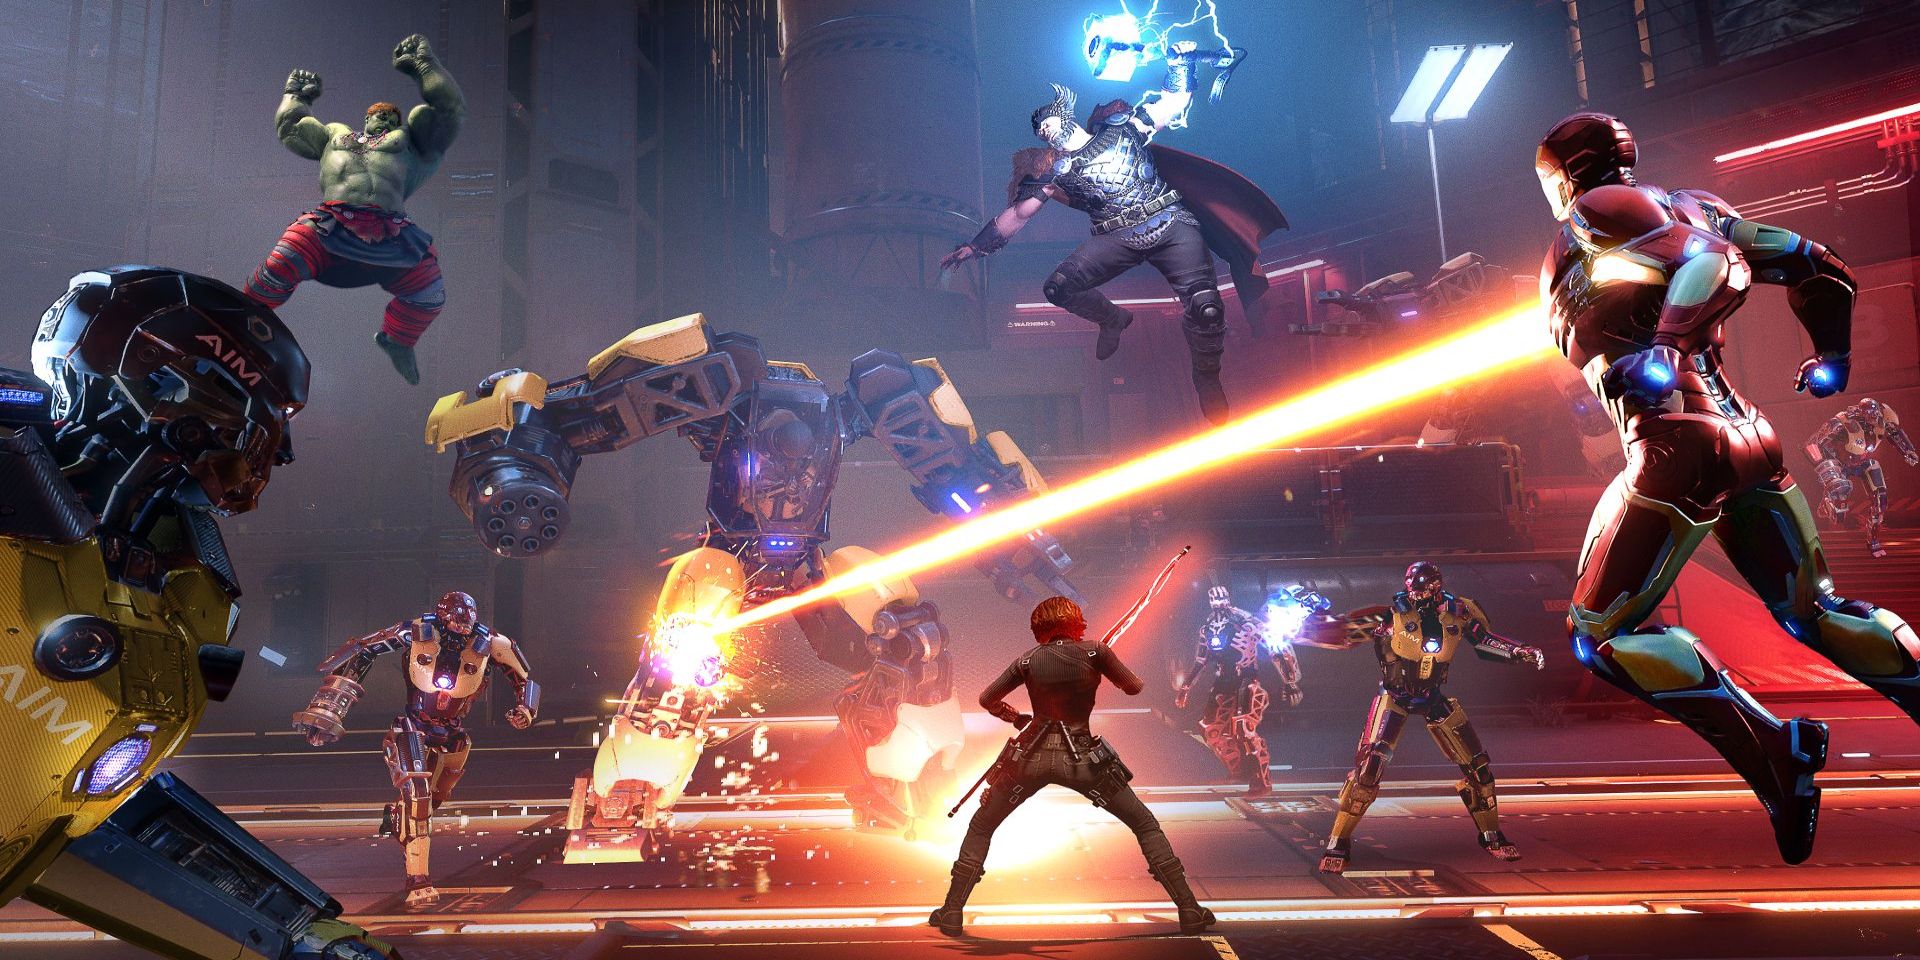 A promotional image from the 2020 live service game Marvel's Anvengers.